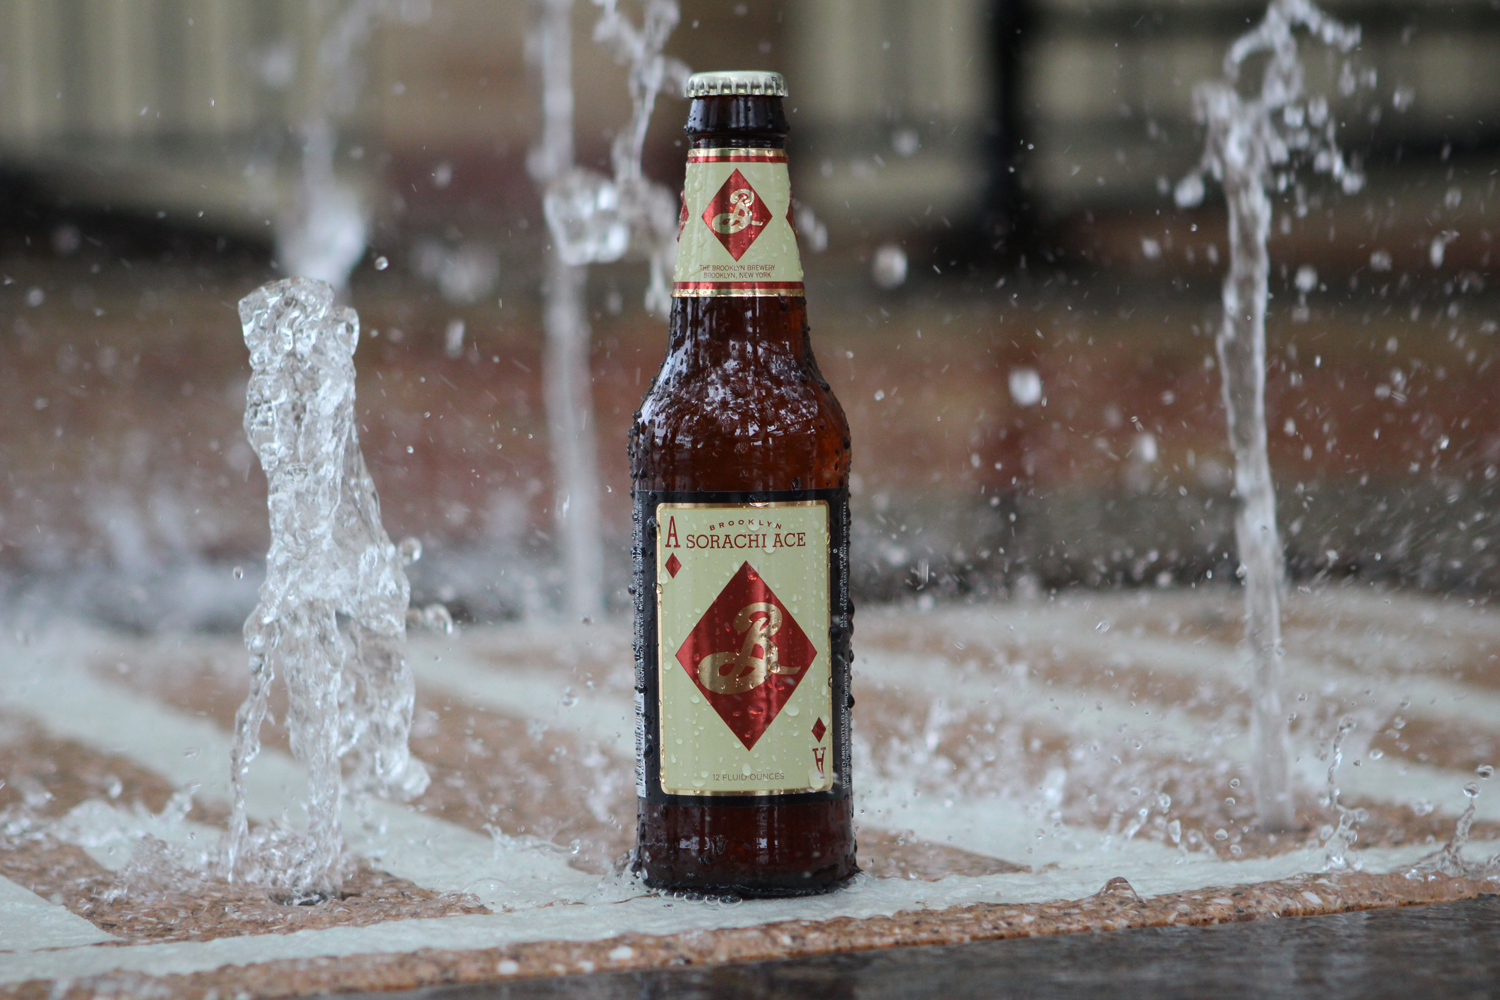 Scorachi Ace from Brooklyn Brewery is a summer farmhouse ale.